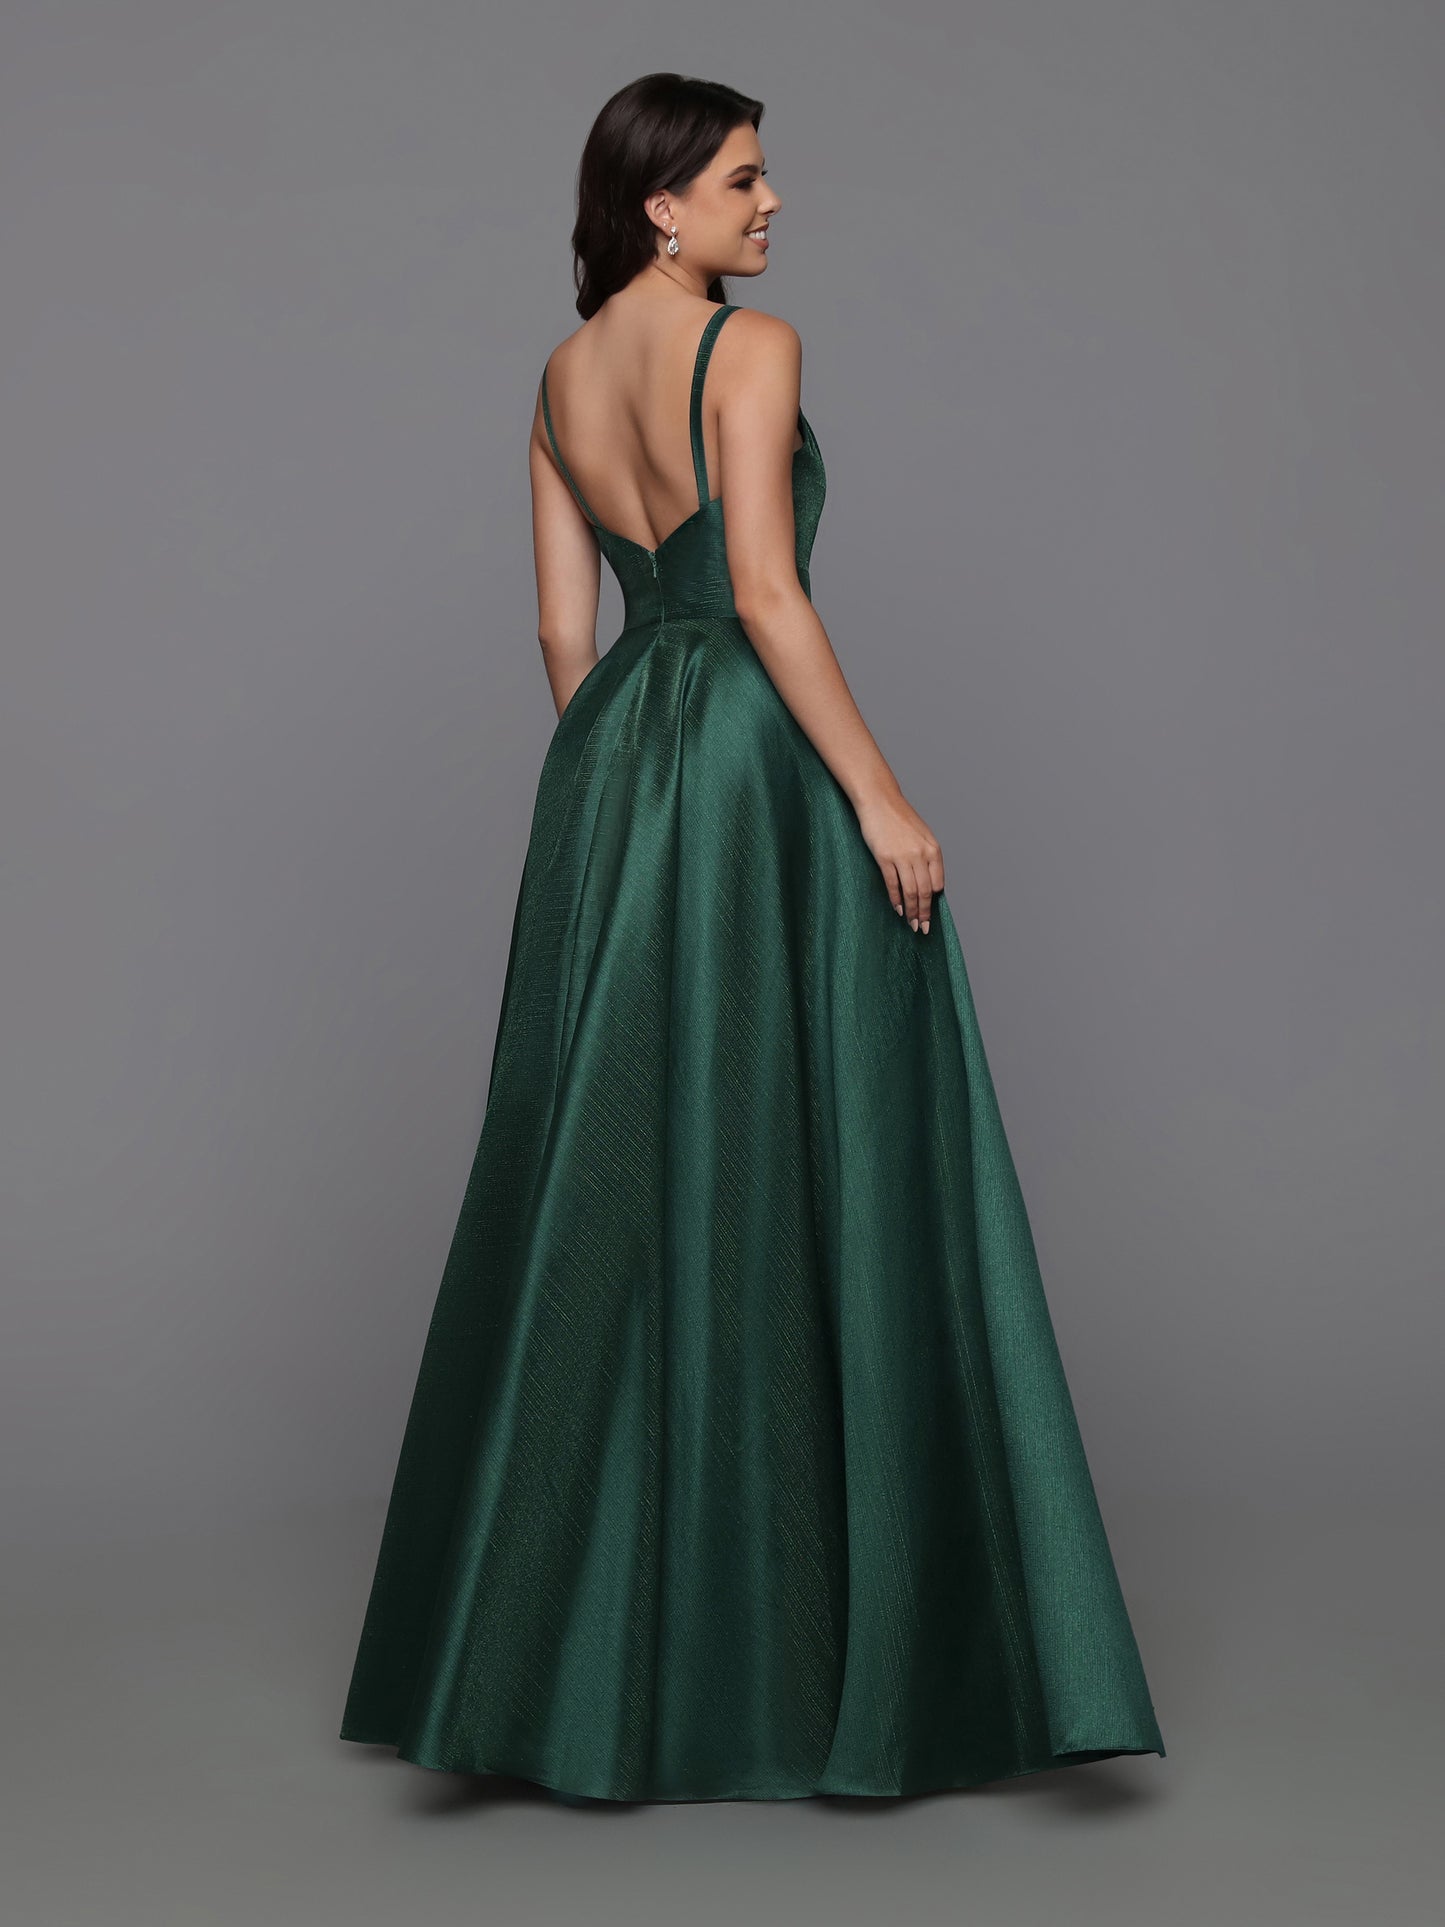 Sparkle Prom 72228 Long A line Shimmer Silk Maxi Slit Prom Dress V Neck Formal Gown  Sizes: 0-20  Colors: Emerald